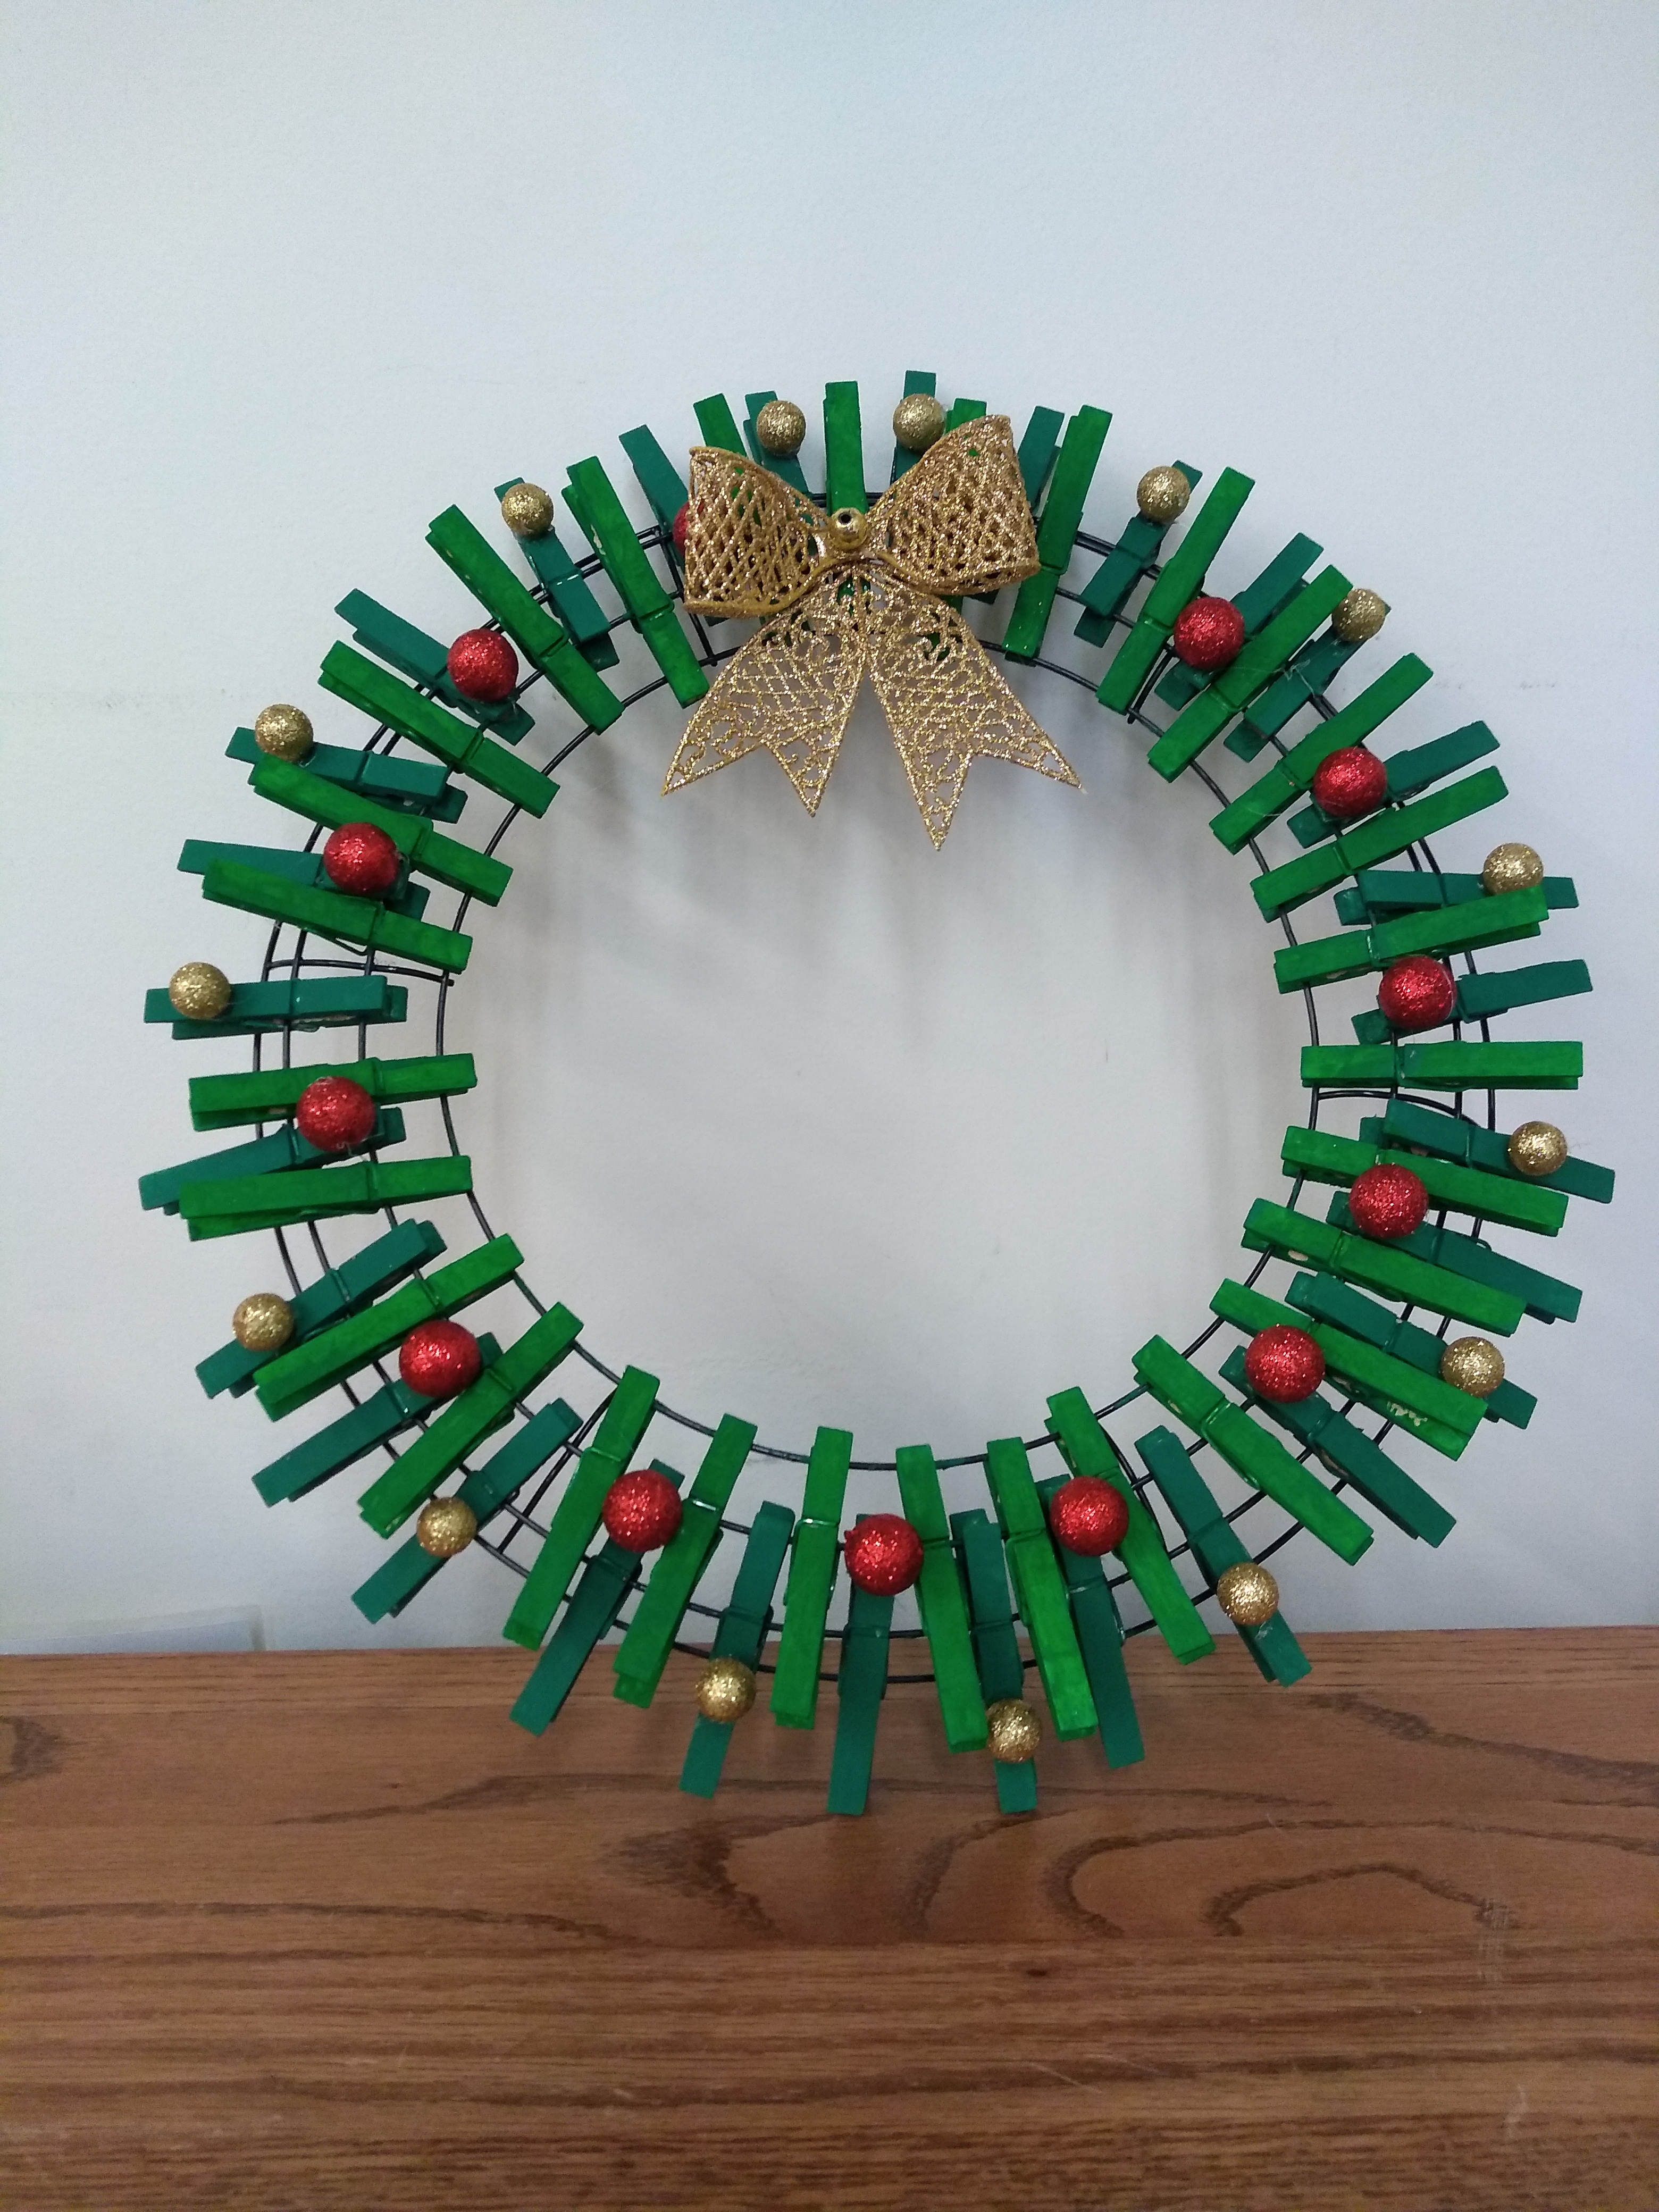 Green wreath made with clothespins